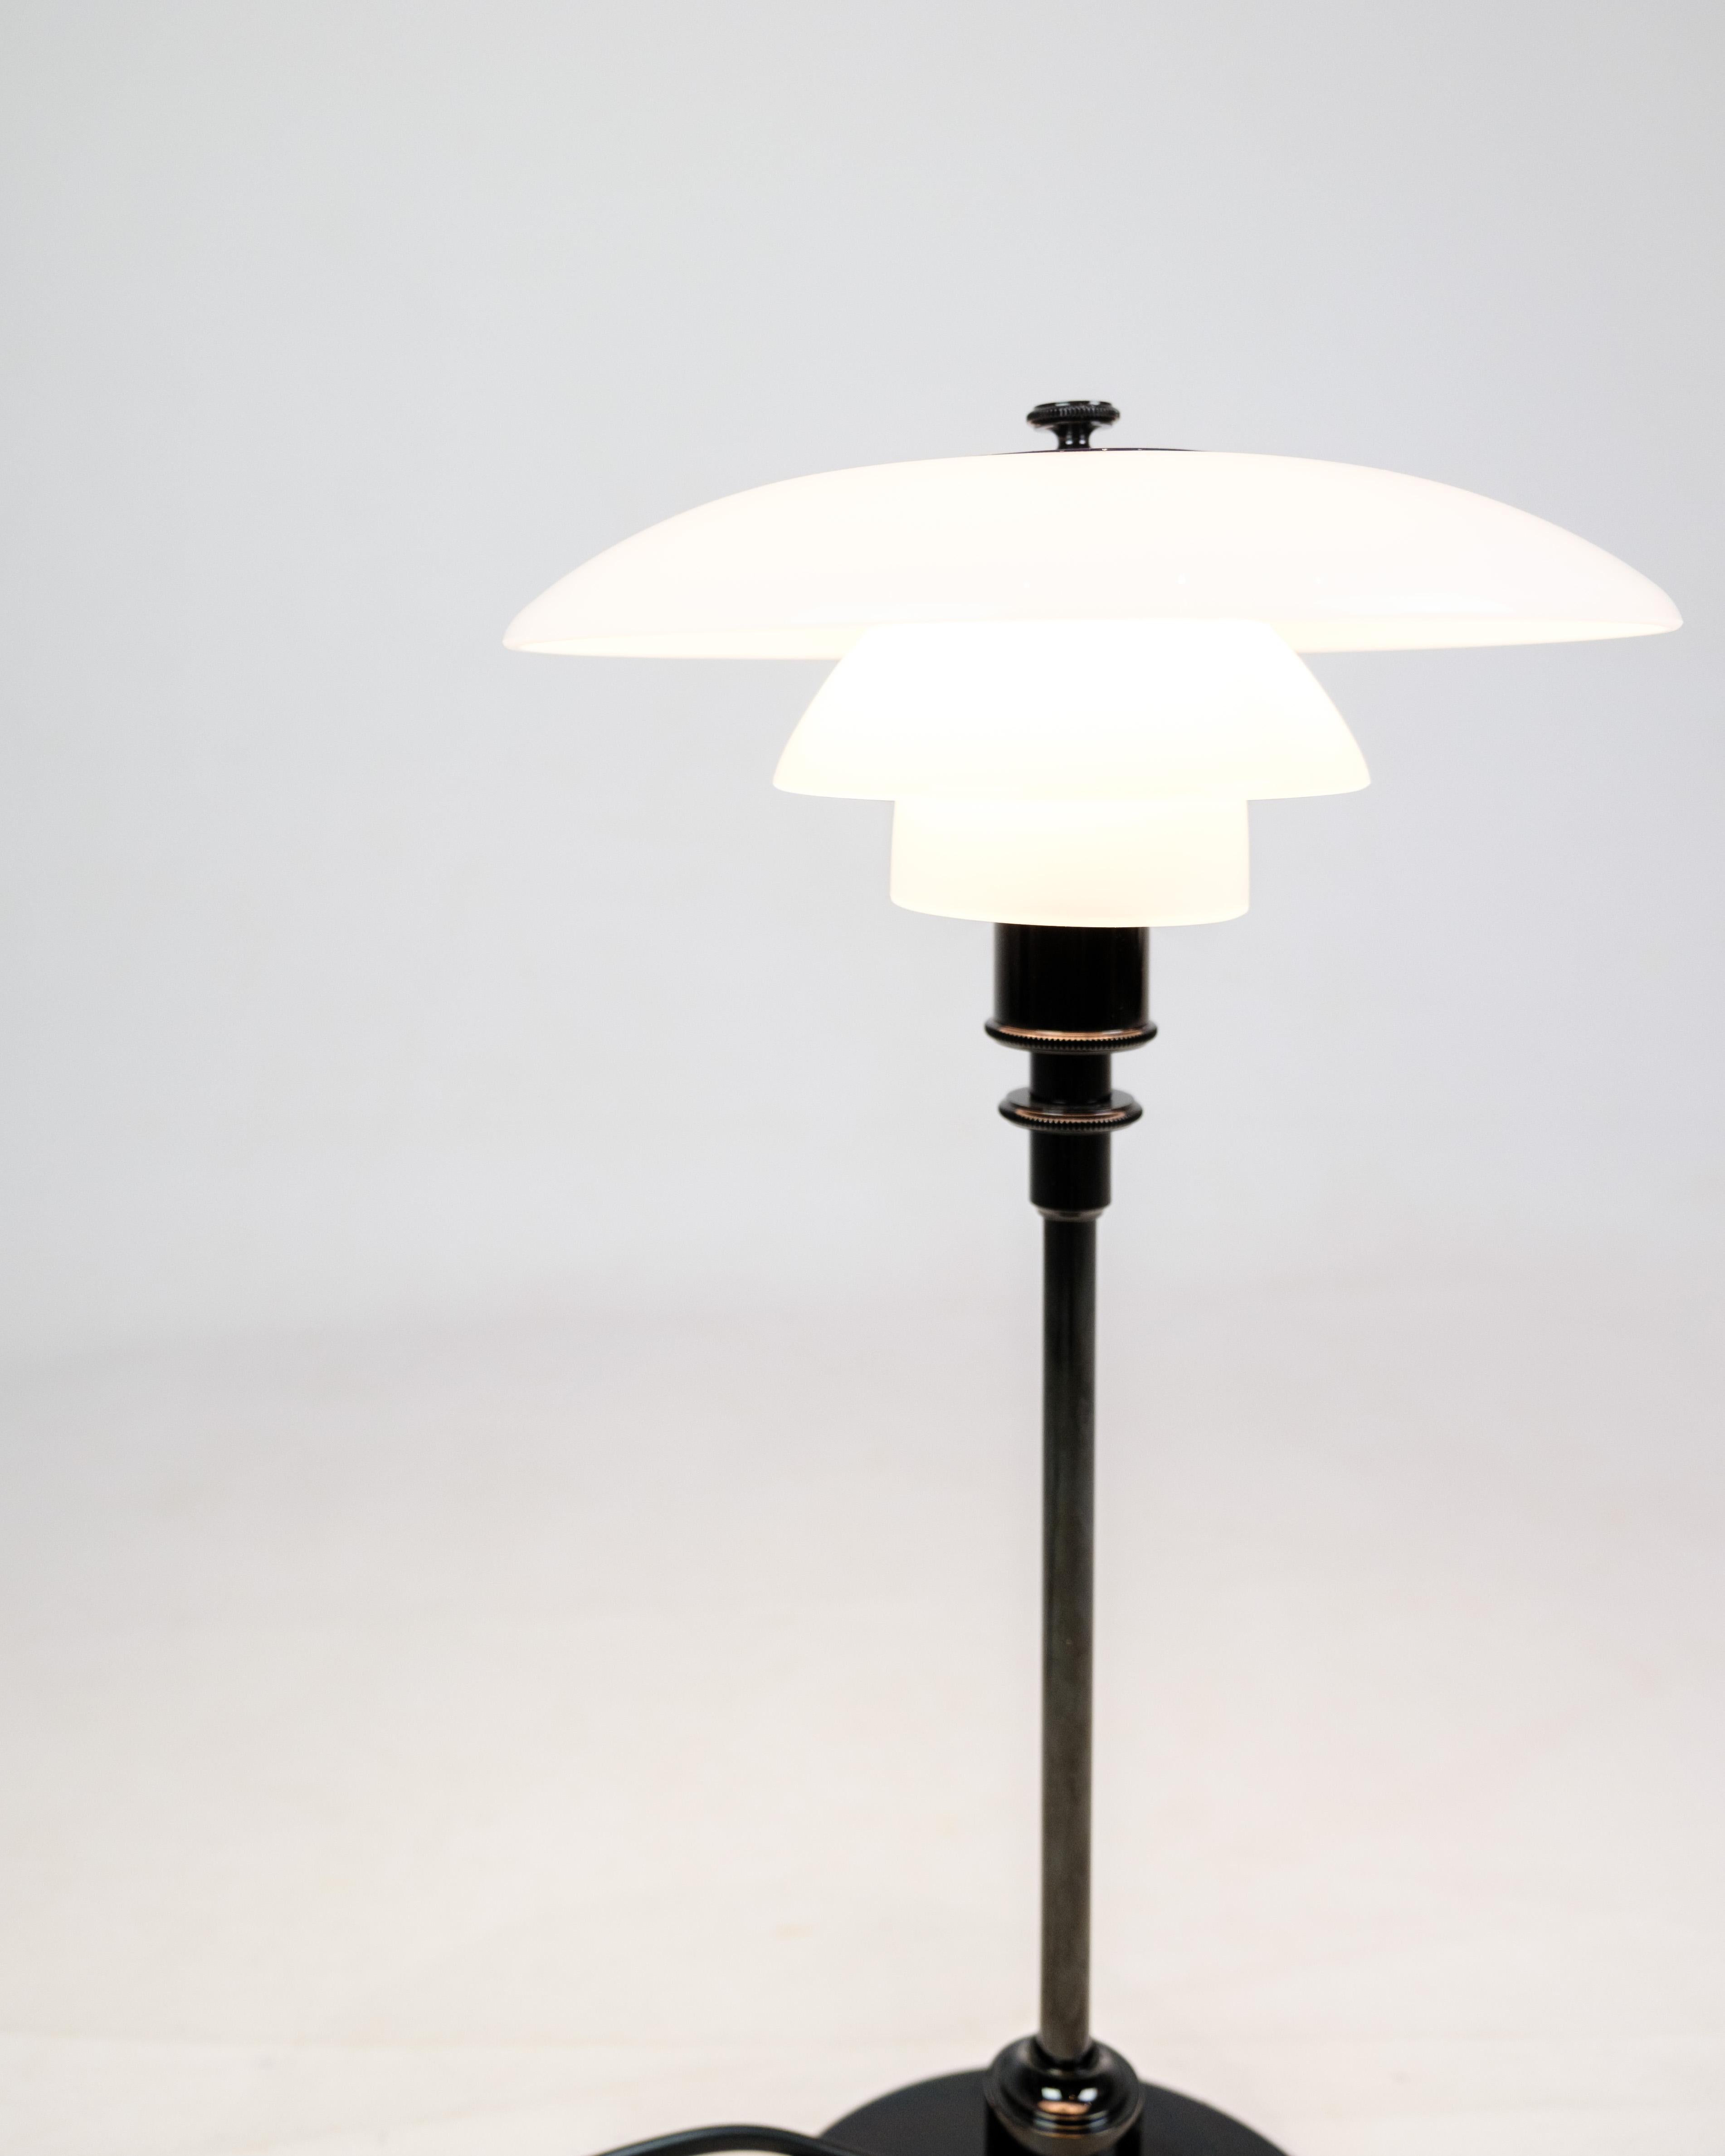 Table lamp, Designed By Poul Henningsen, Model 3/2, Made By Louis Poulsen In Good Condition For Sale In Lejre, DK